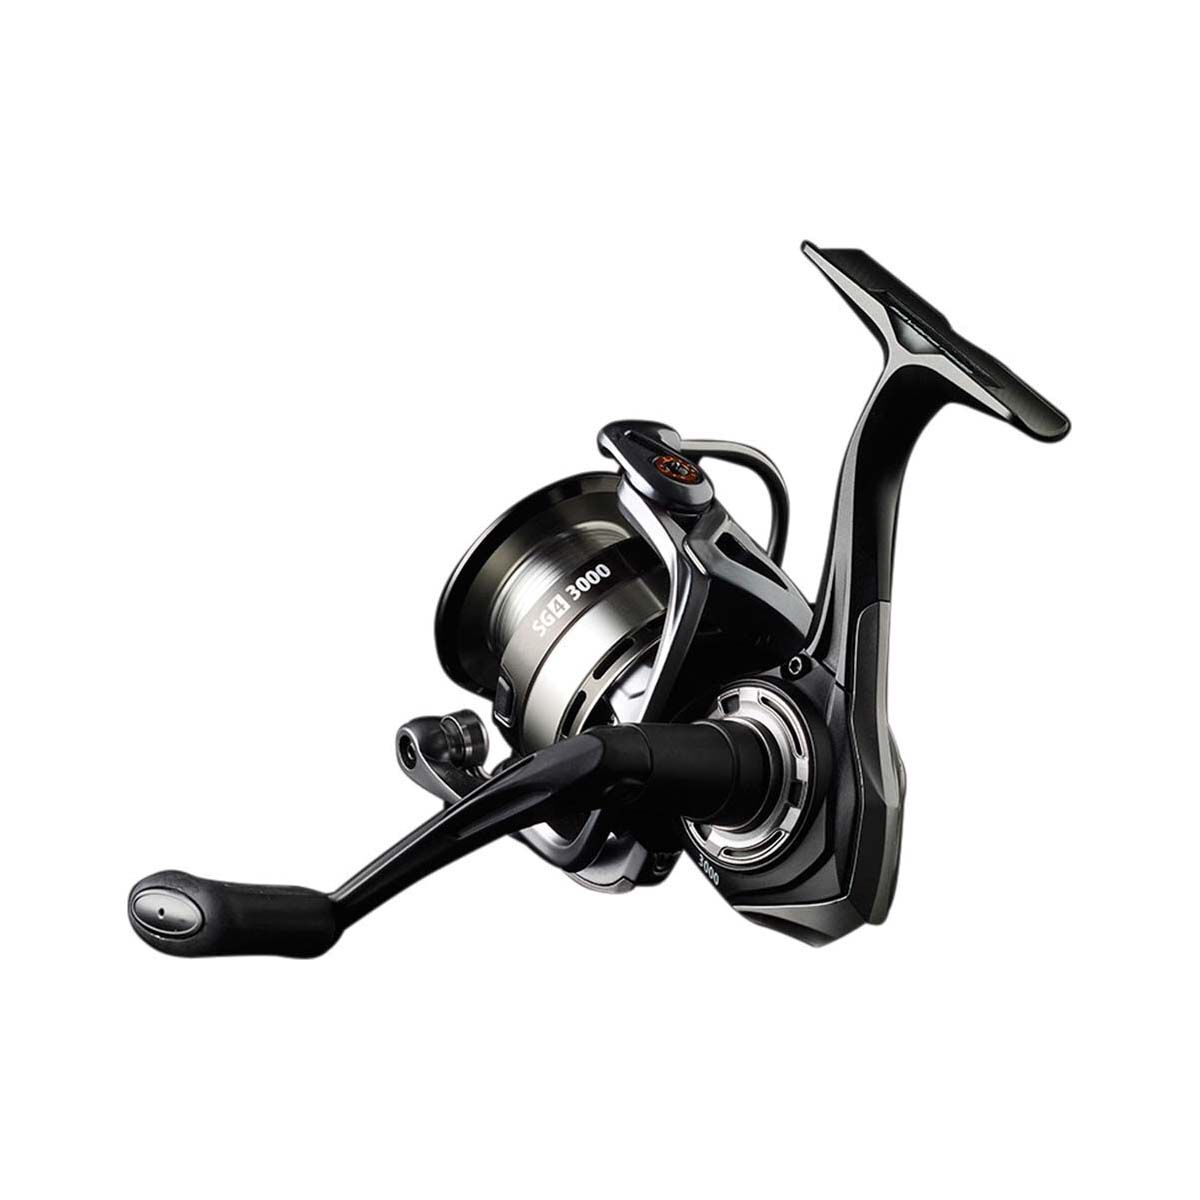 Savage Gear NEW SG4 Spinning Fishing Reel 8+1BBs - With Spare